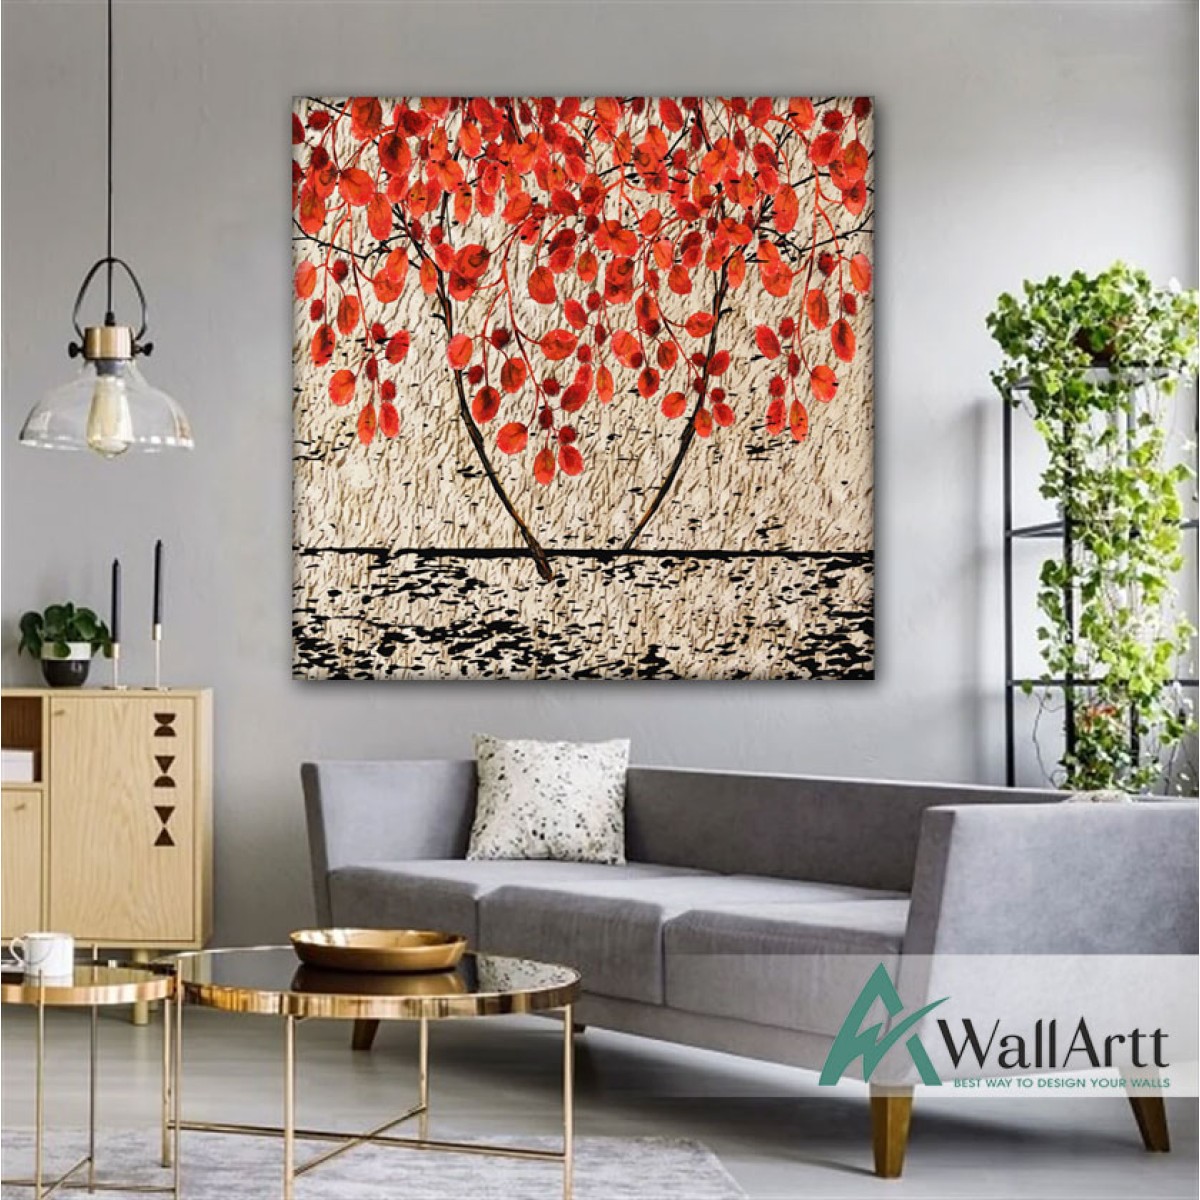 Red Leaves Textured Partial Oil Painting